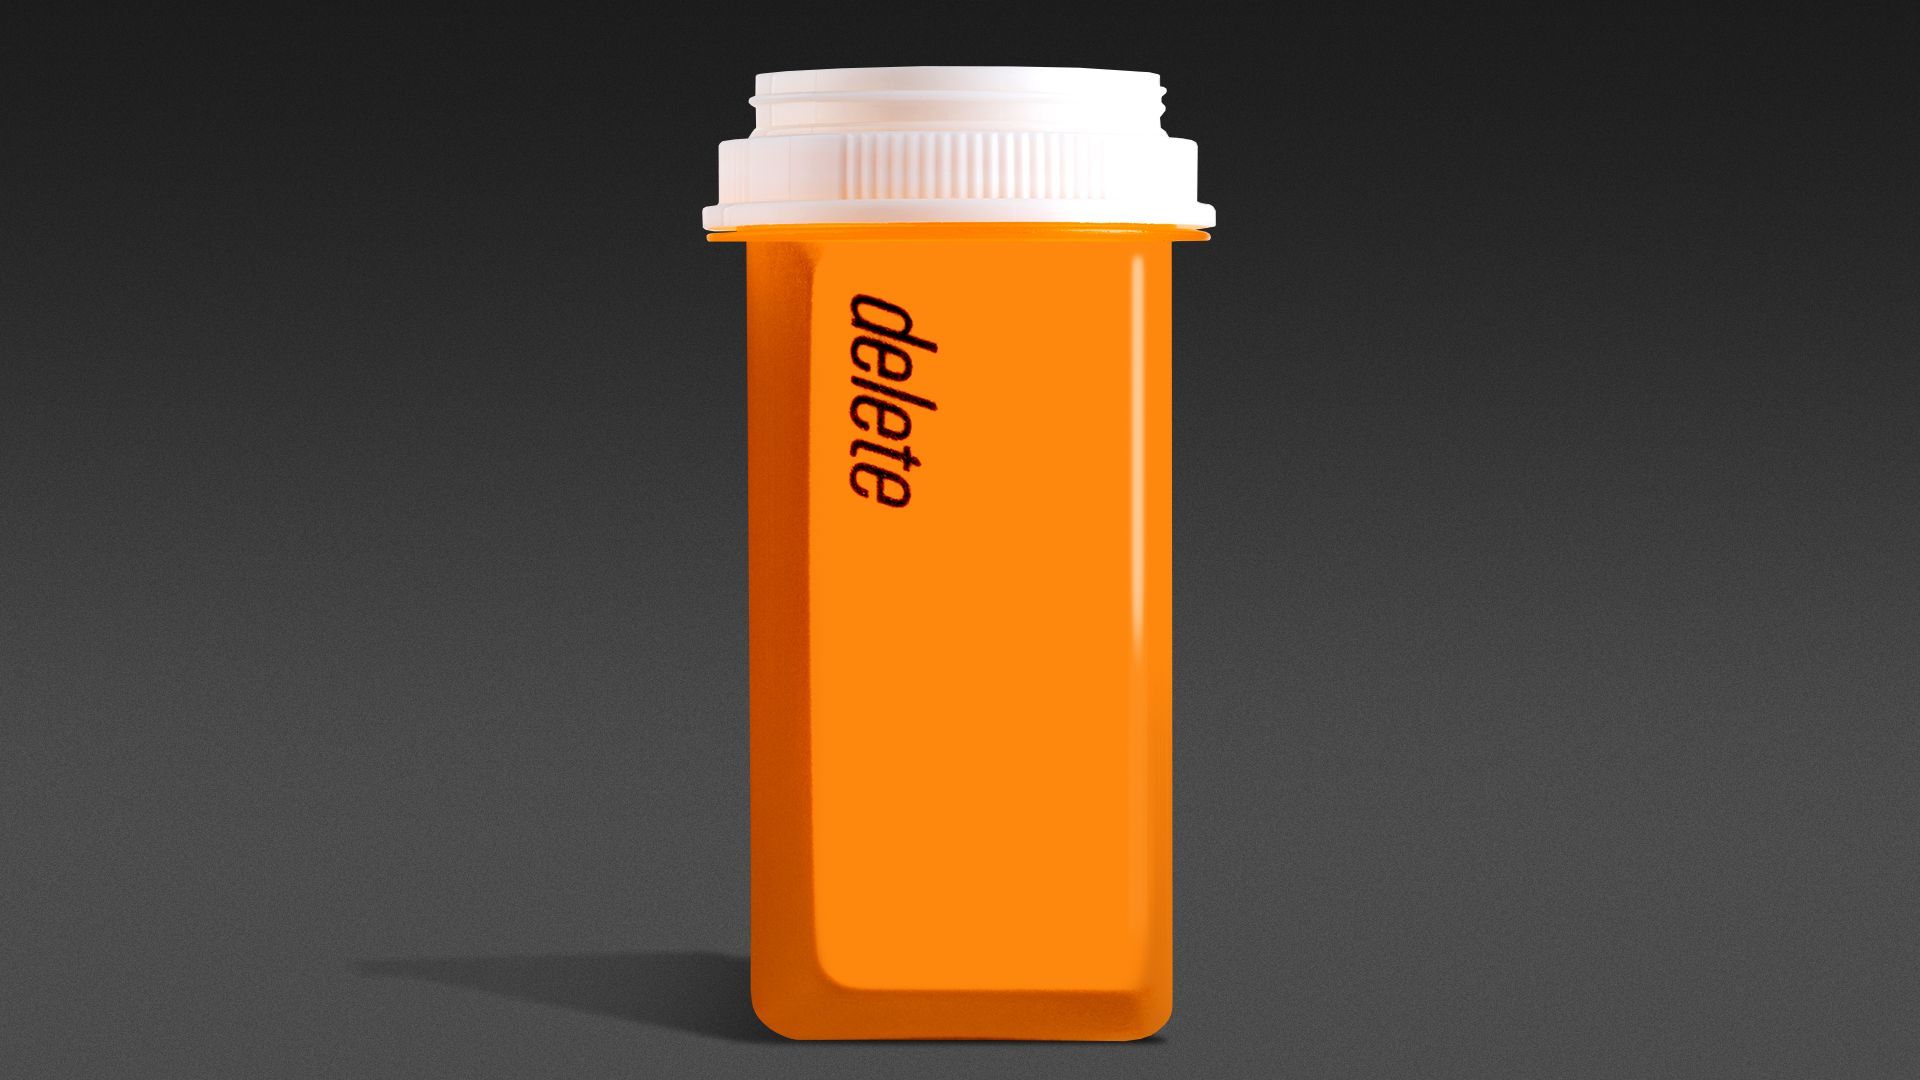 Illustration of a prescription pill bottle made with a delete key.